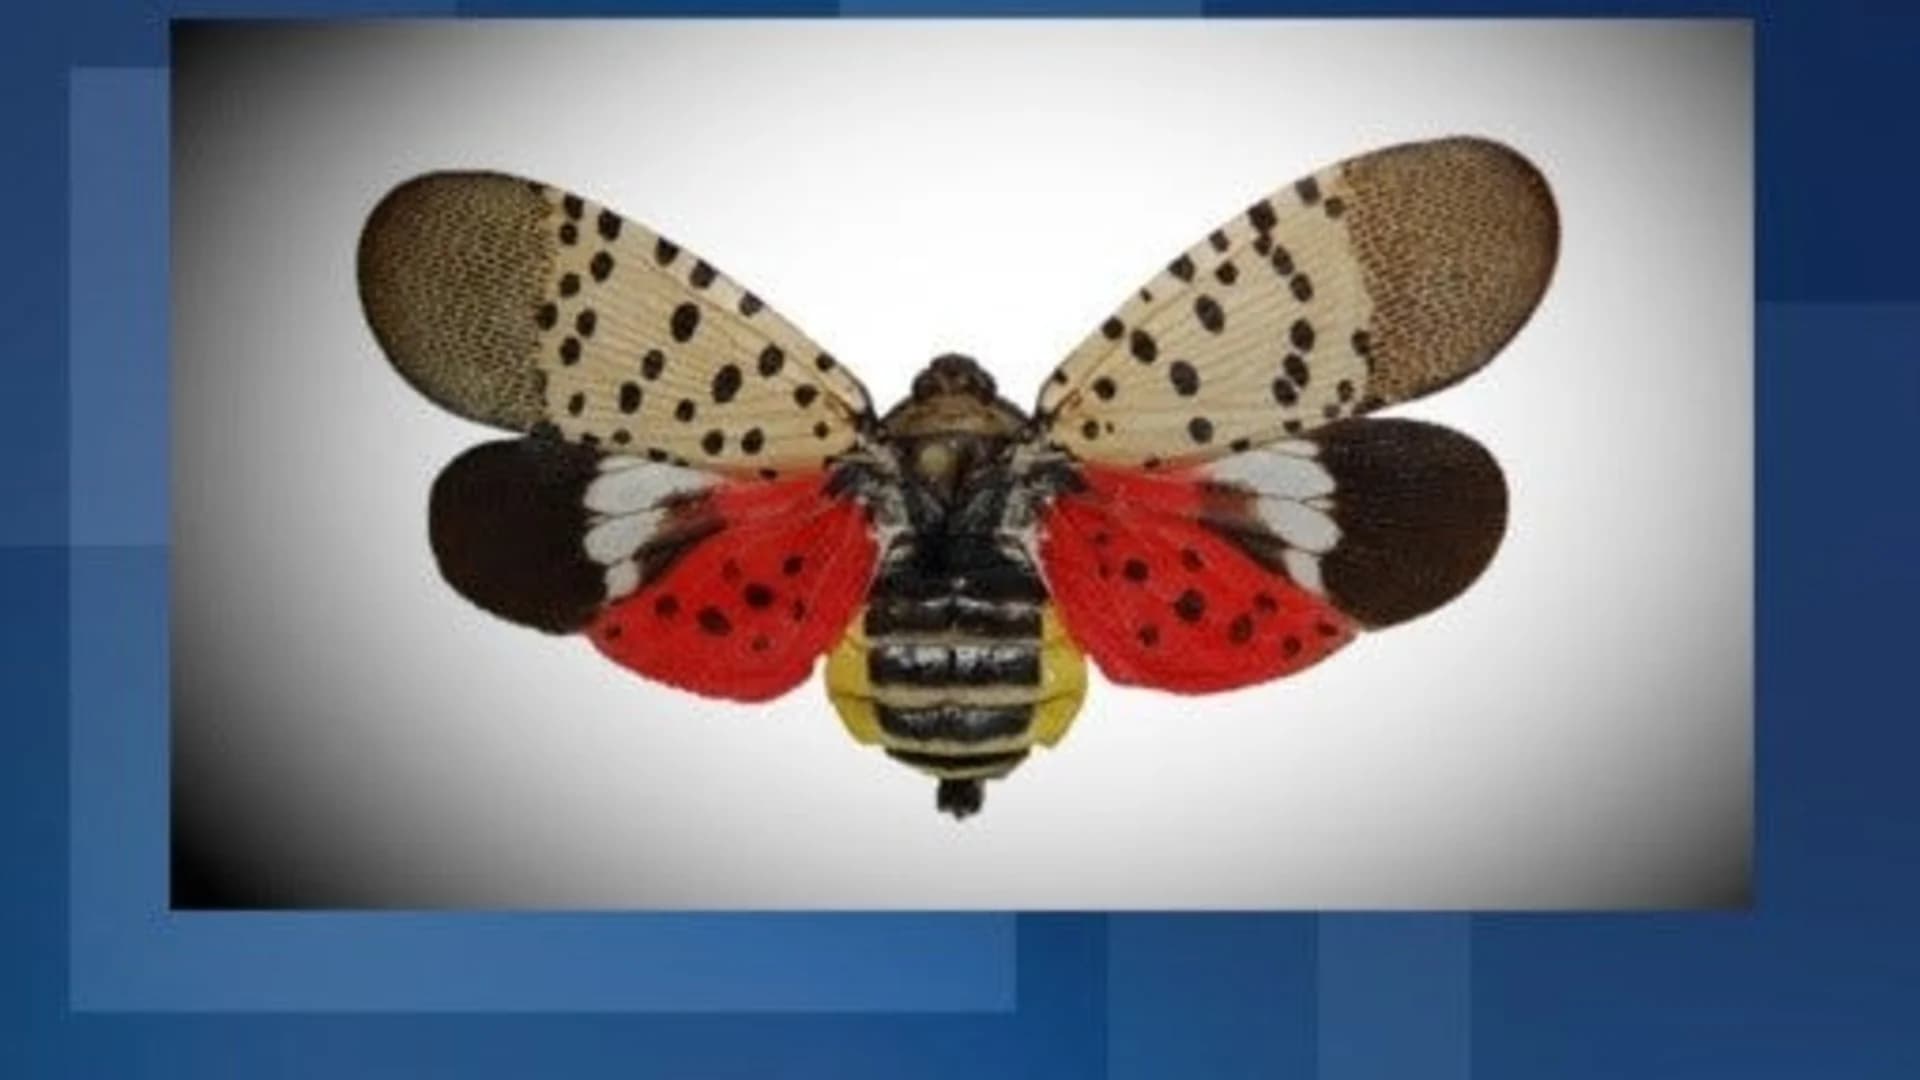 Insect poses possible risk to trees, plants in New Jersey